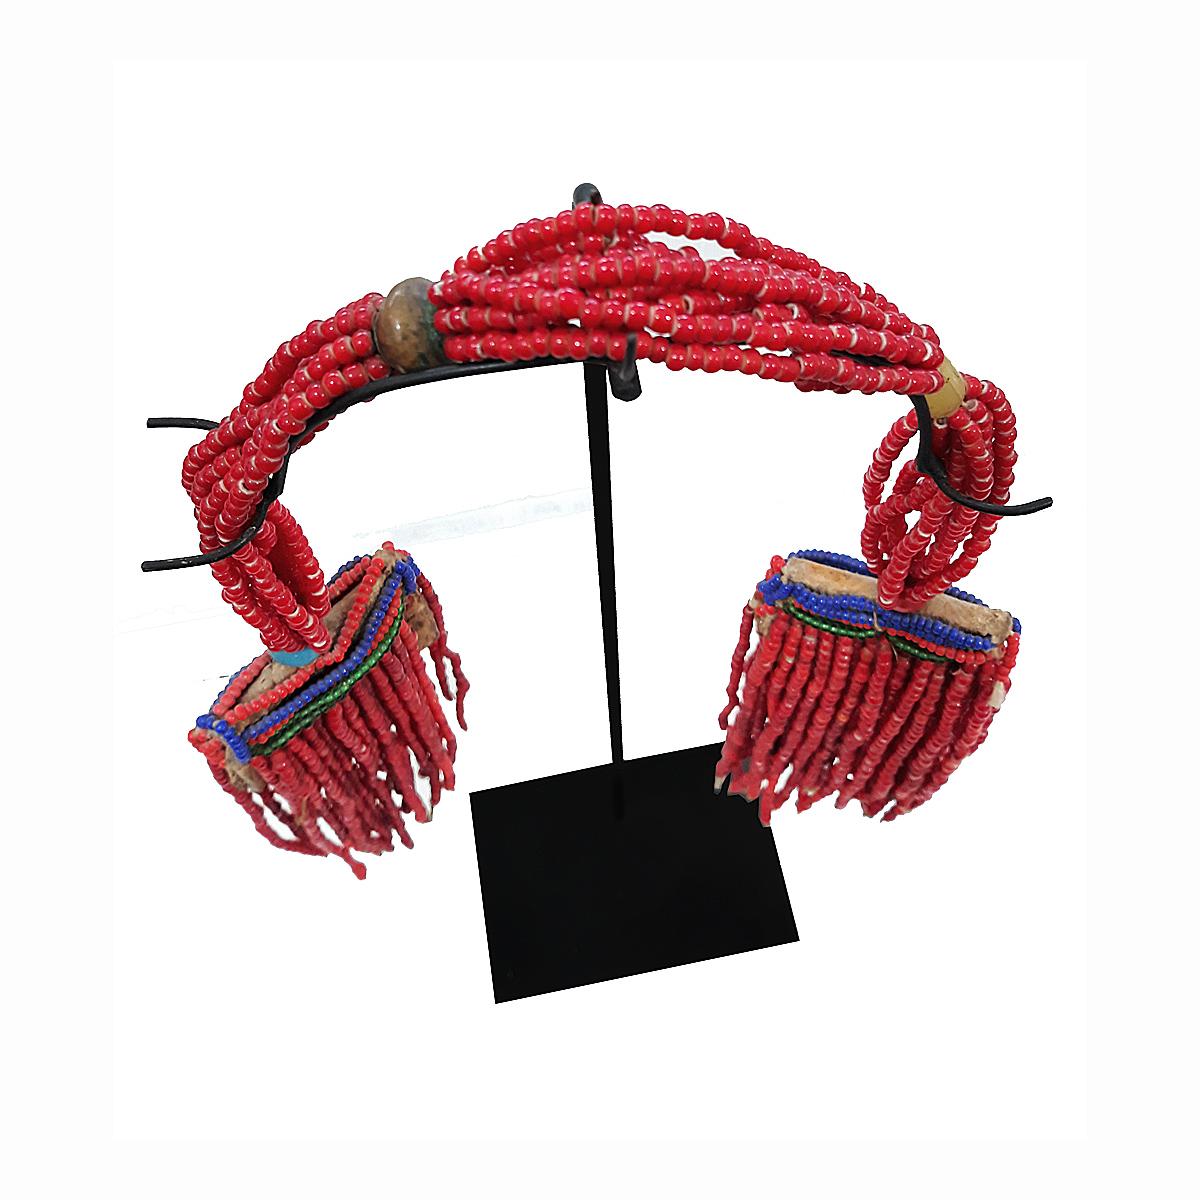 An Ethiopian women's headpiece, made of old 